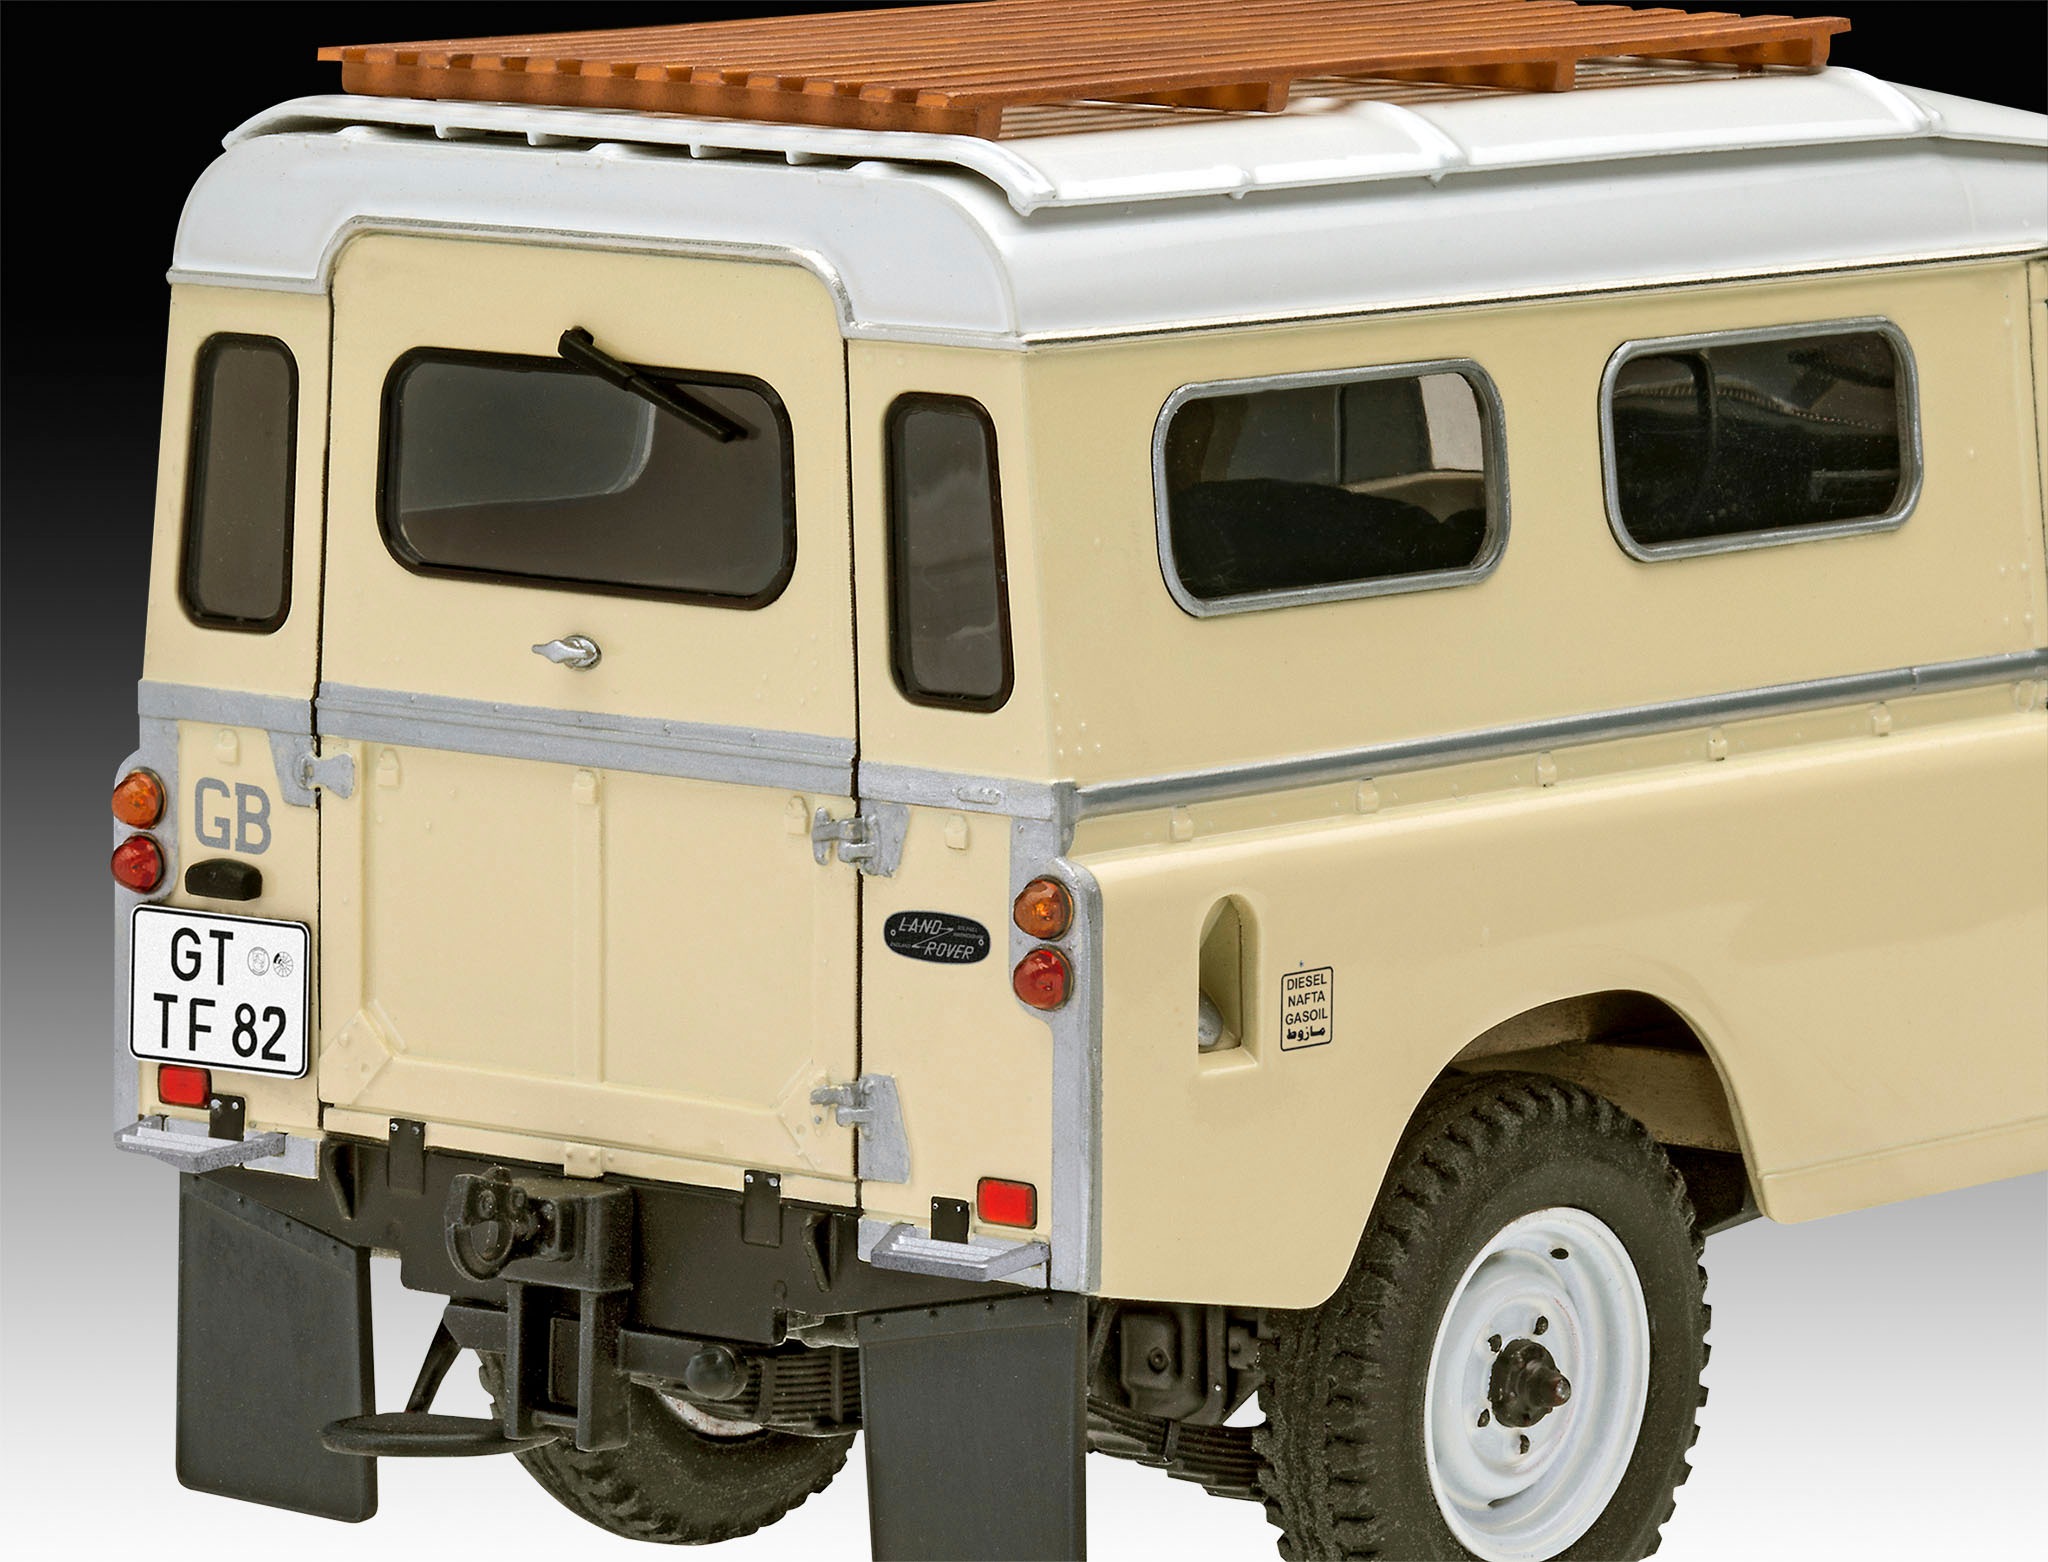 Revell® Modellbausatz »Land Rover Series III LWB (commercial)«, 1:24, Made in Europe